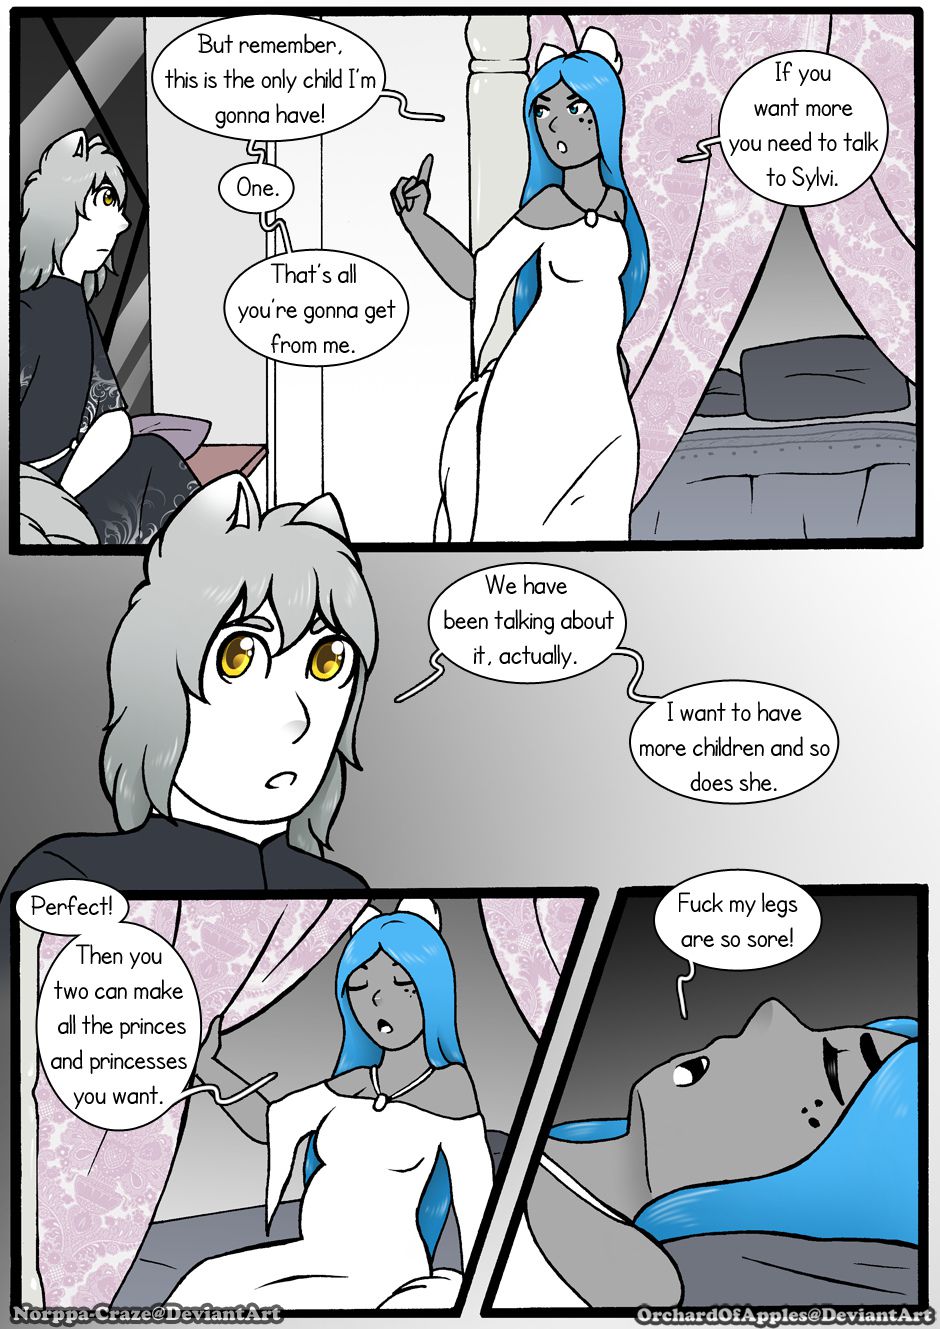 [Jeny-jen94] Between Kings and Queens [Ongoing] 308